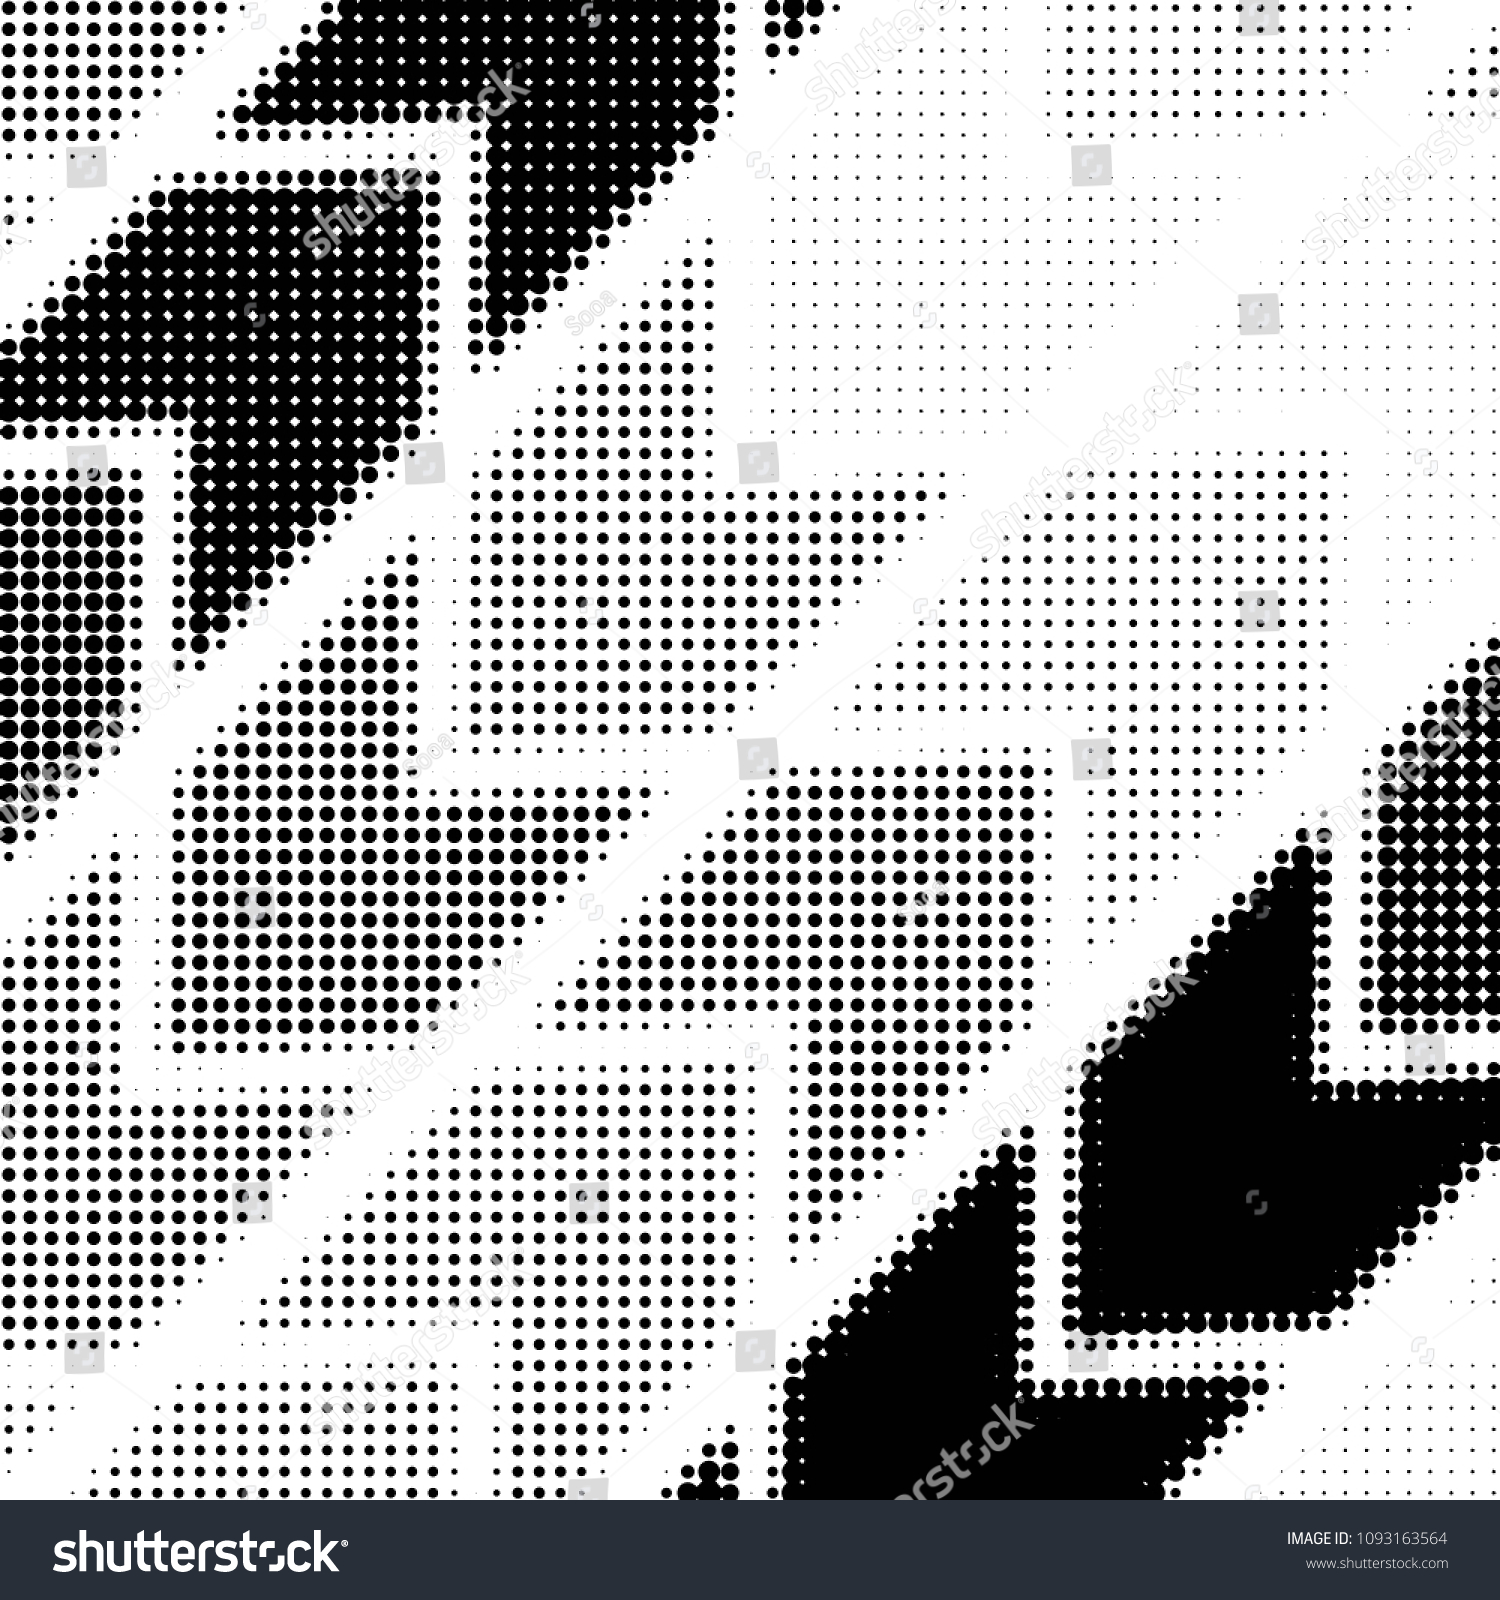 Abstract grunge grid polka dot halftone background pattern. Spotted black and white line illustration
 #1093163564